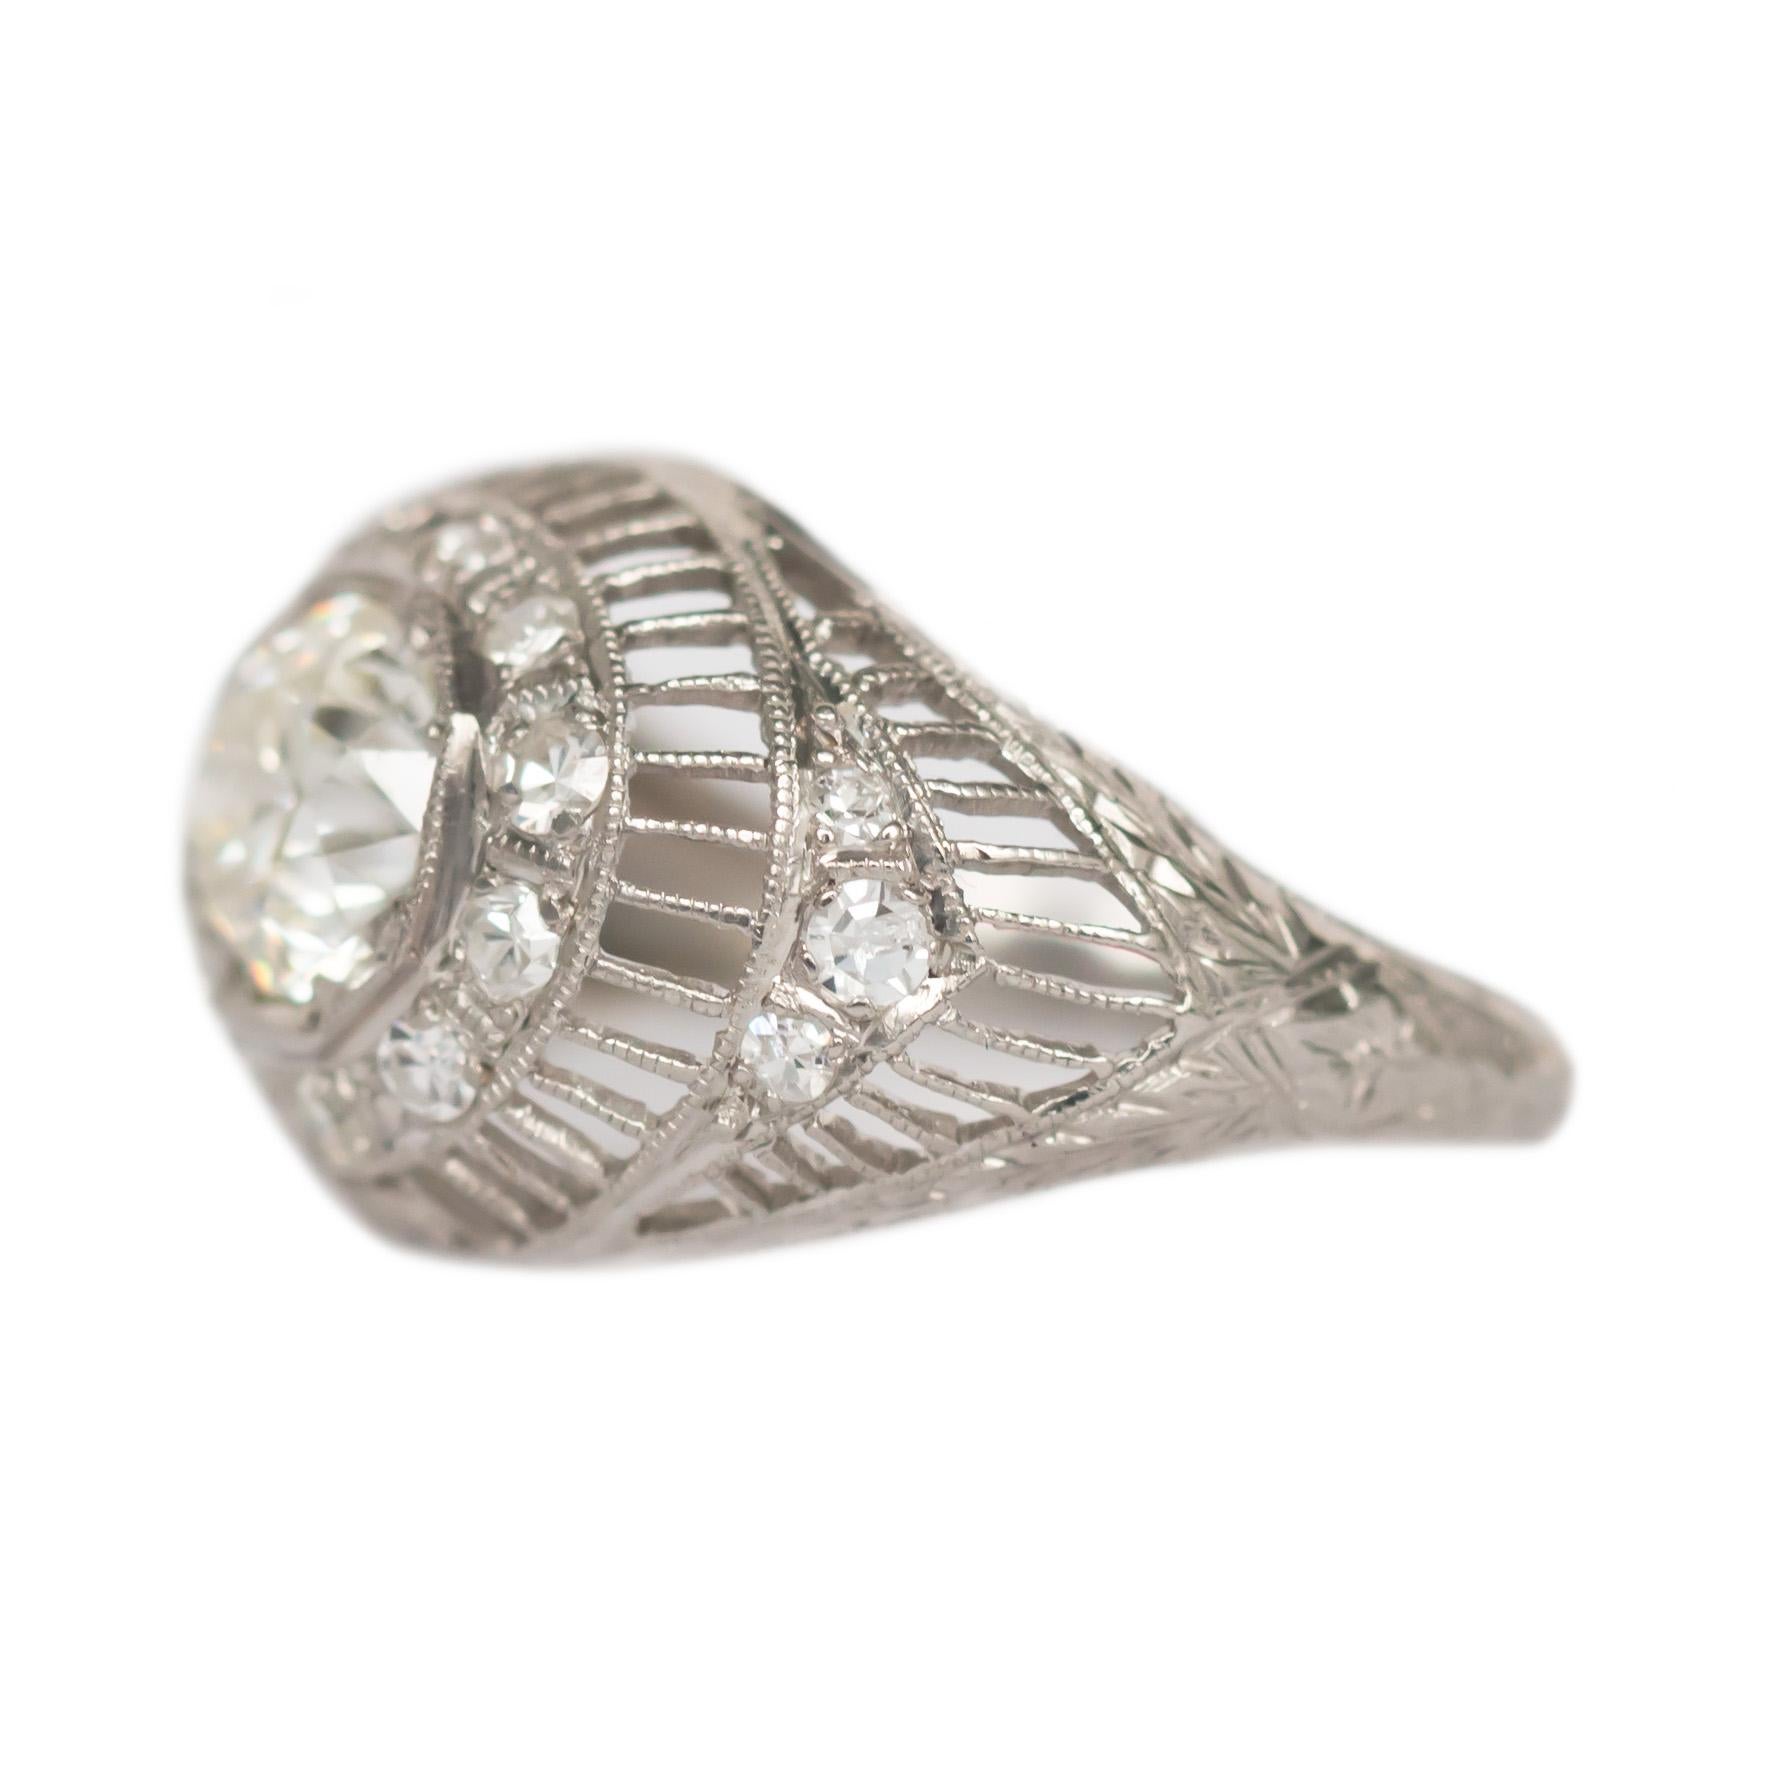 Ring Size: 5.95
Metal Type: Platinum [Hallmarked, and Tested]
Weight: 3.2 grams

Center Diamond Details:
Weight: .86 carat
Cut: Old European Brilliant
Color: J
Clarity: VS1

Side Diamond Details:
Weight: .20 carat, total weight
Cut: Old European